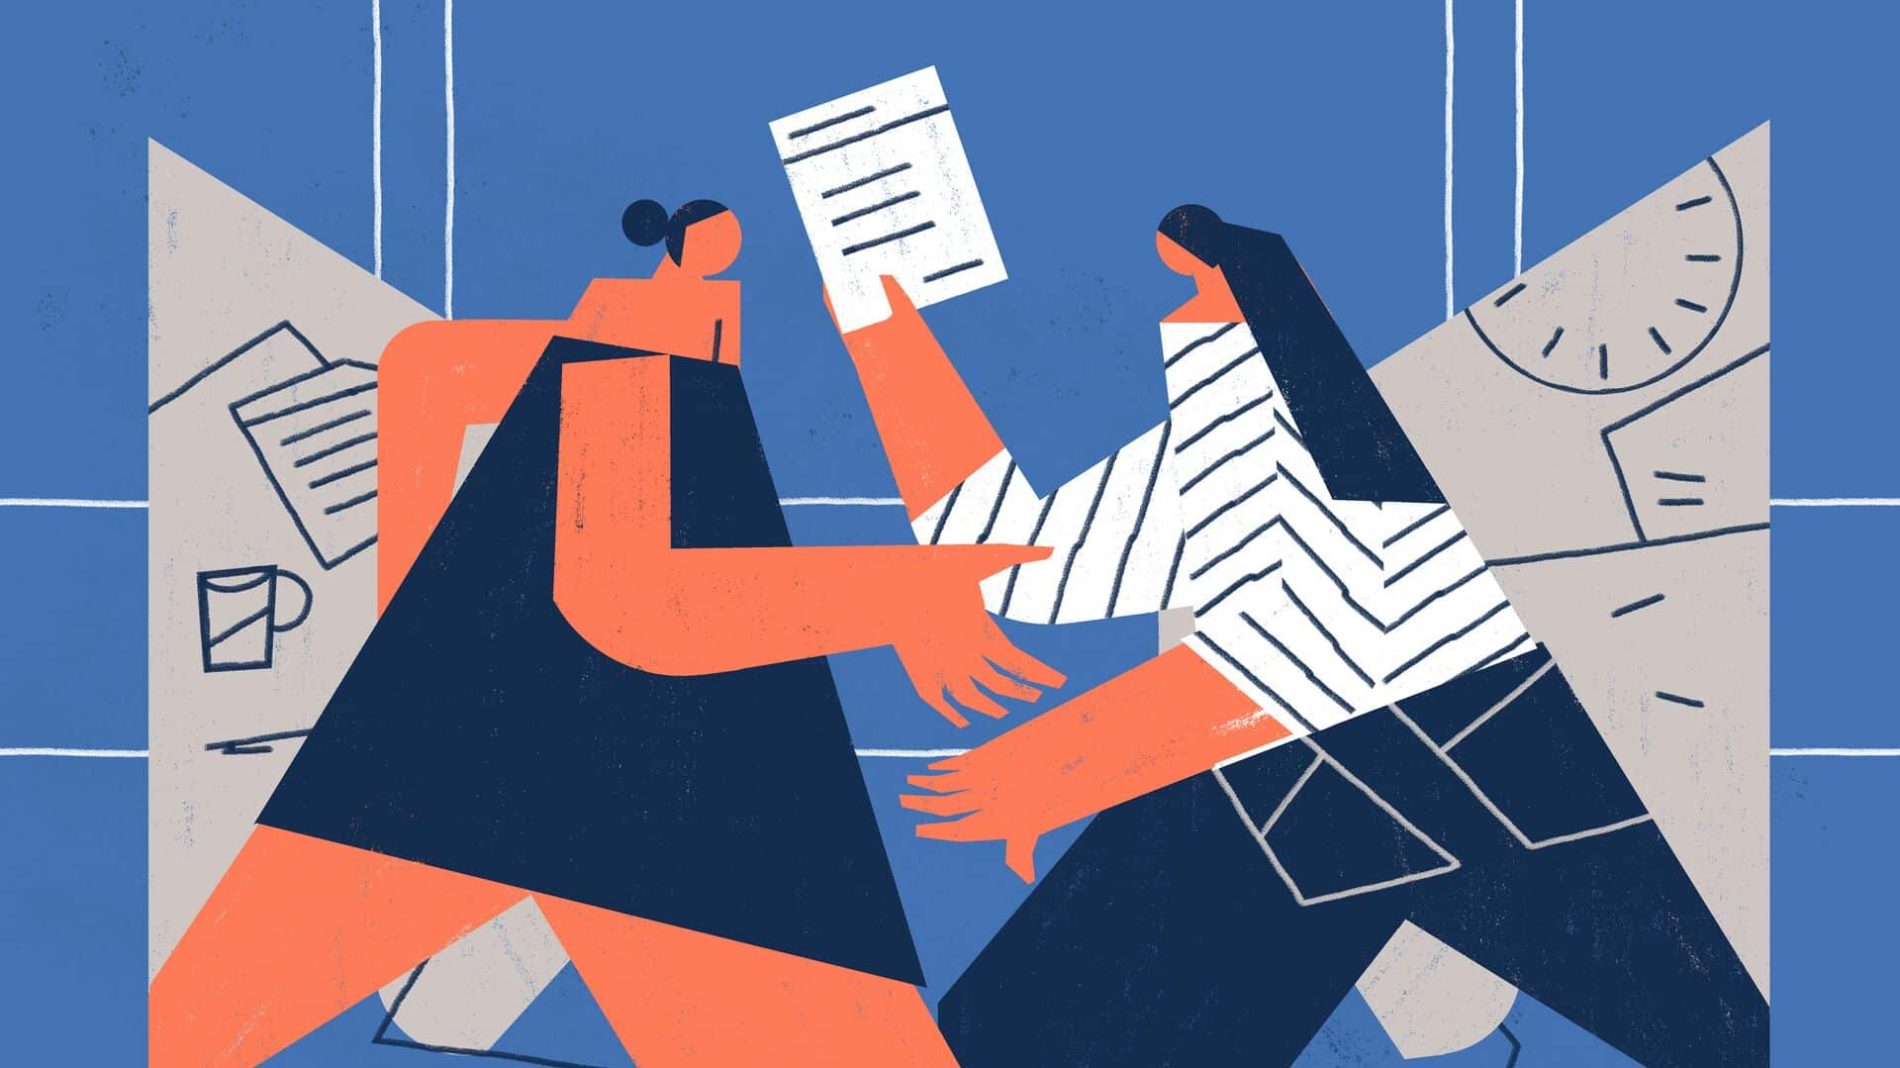 Illustration of a person handing a cv or resume to someone else